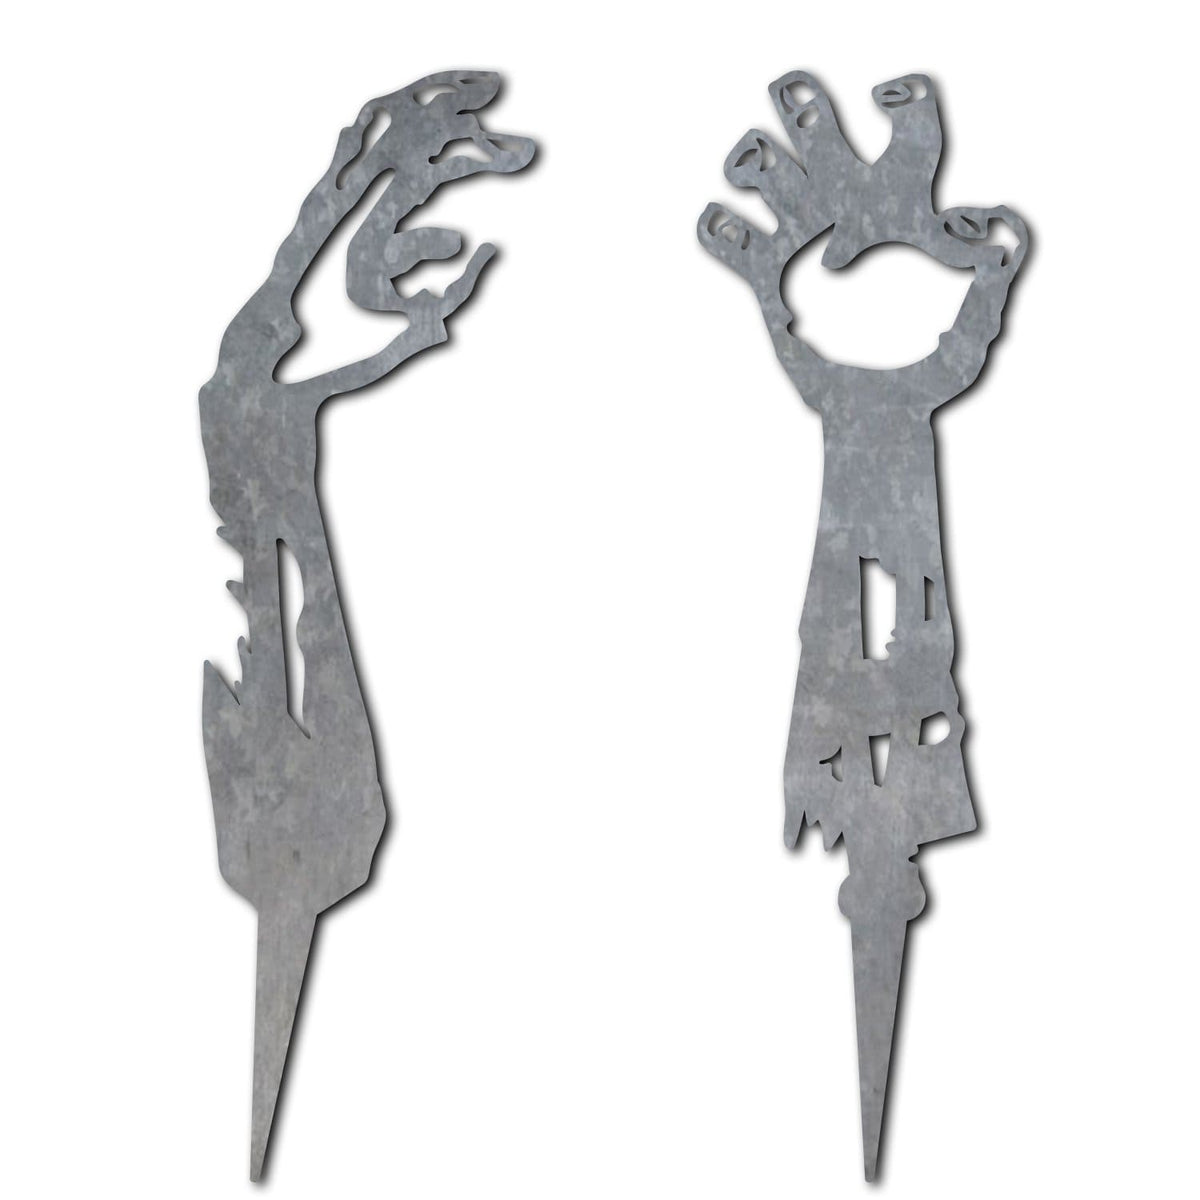 Metal Halloween yard decor - Zombie arms from Personal Prints